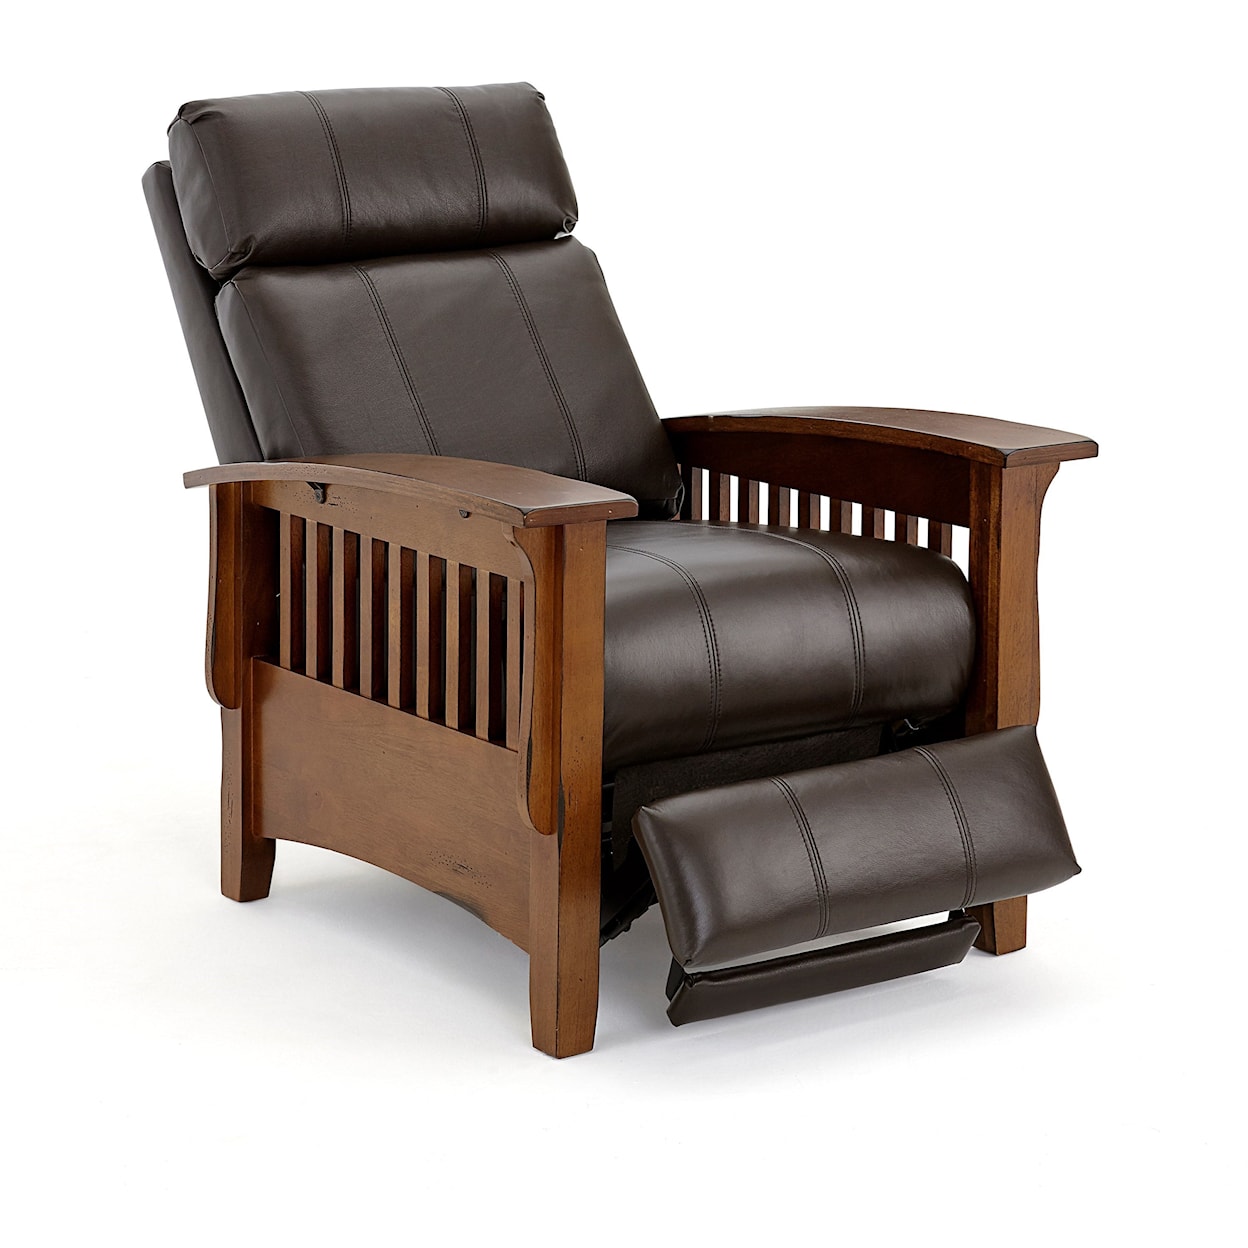 Best Home Furnishings Pushback Recliners Tuscan Pushback Recliners